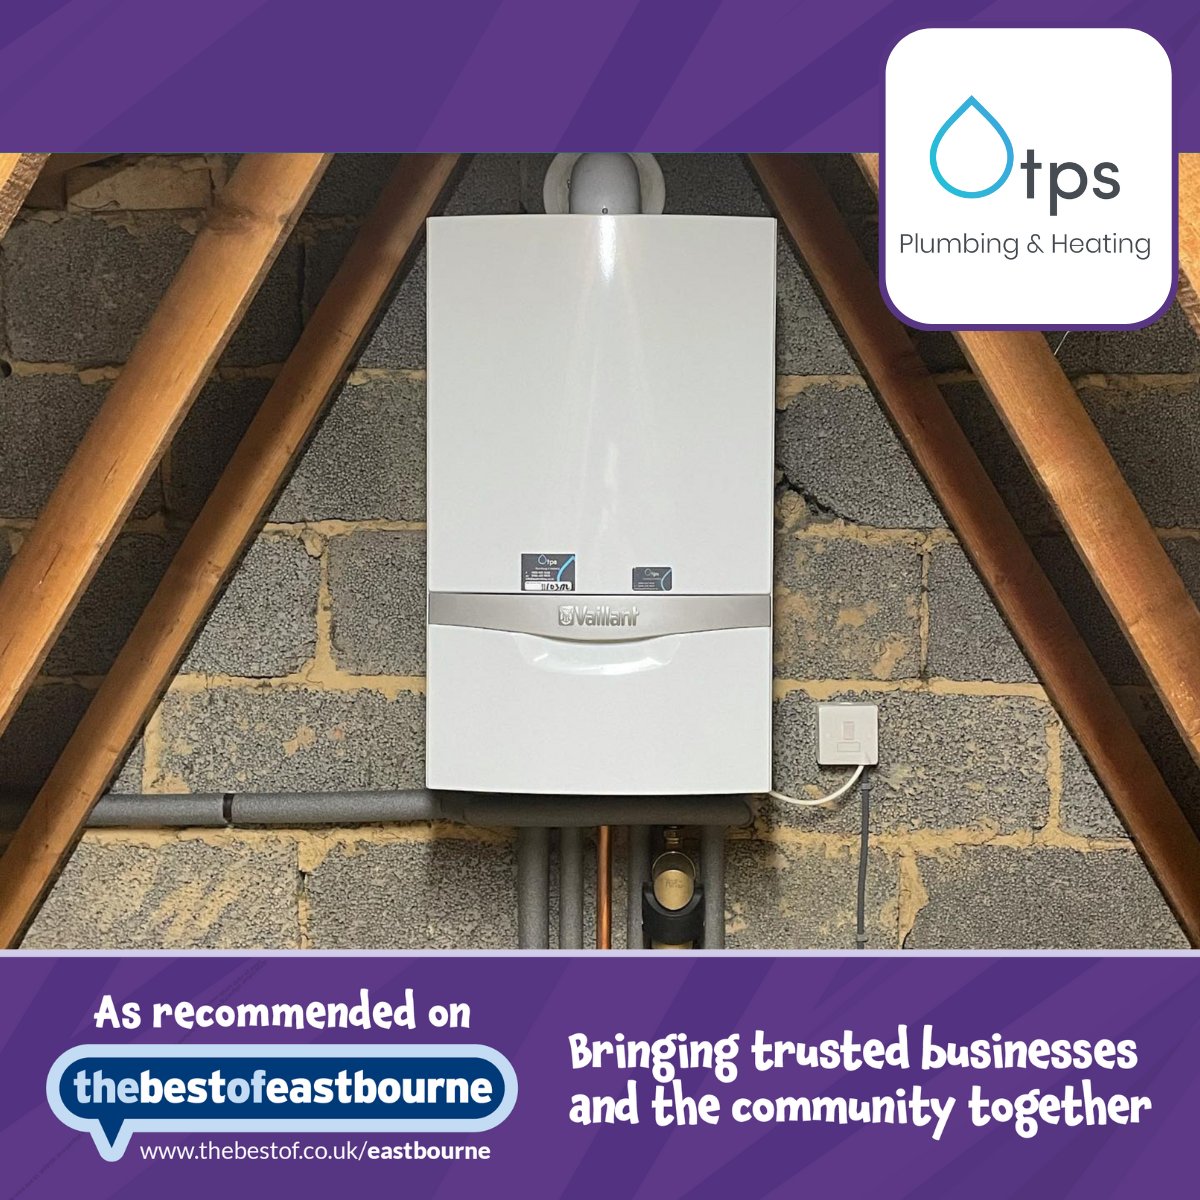 Book your annual boiler service today with TPS Plumbing and Heating to increase efficiency, reliability, and reduce the chance of carbon monoxide poisoning. 

Don't wait, contact them via #BestOfEastbourne bit.ly/41HAv9L 

#BoilerService #EastbournePlumbing #GasSafe